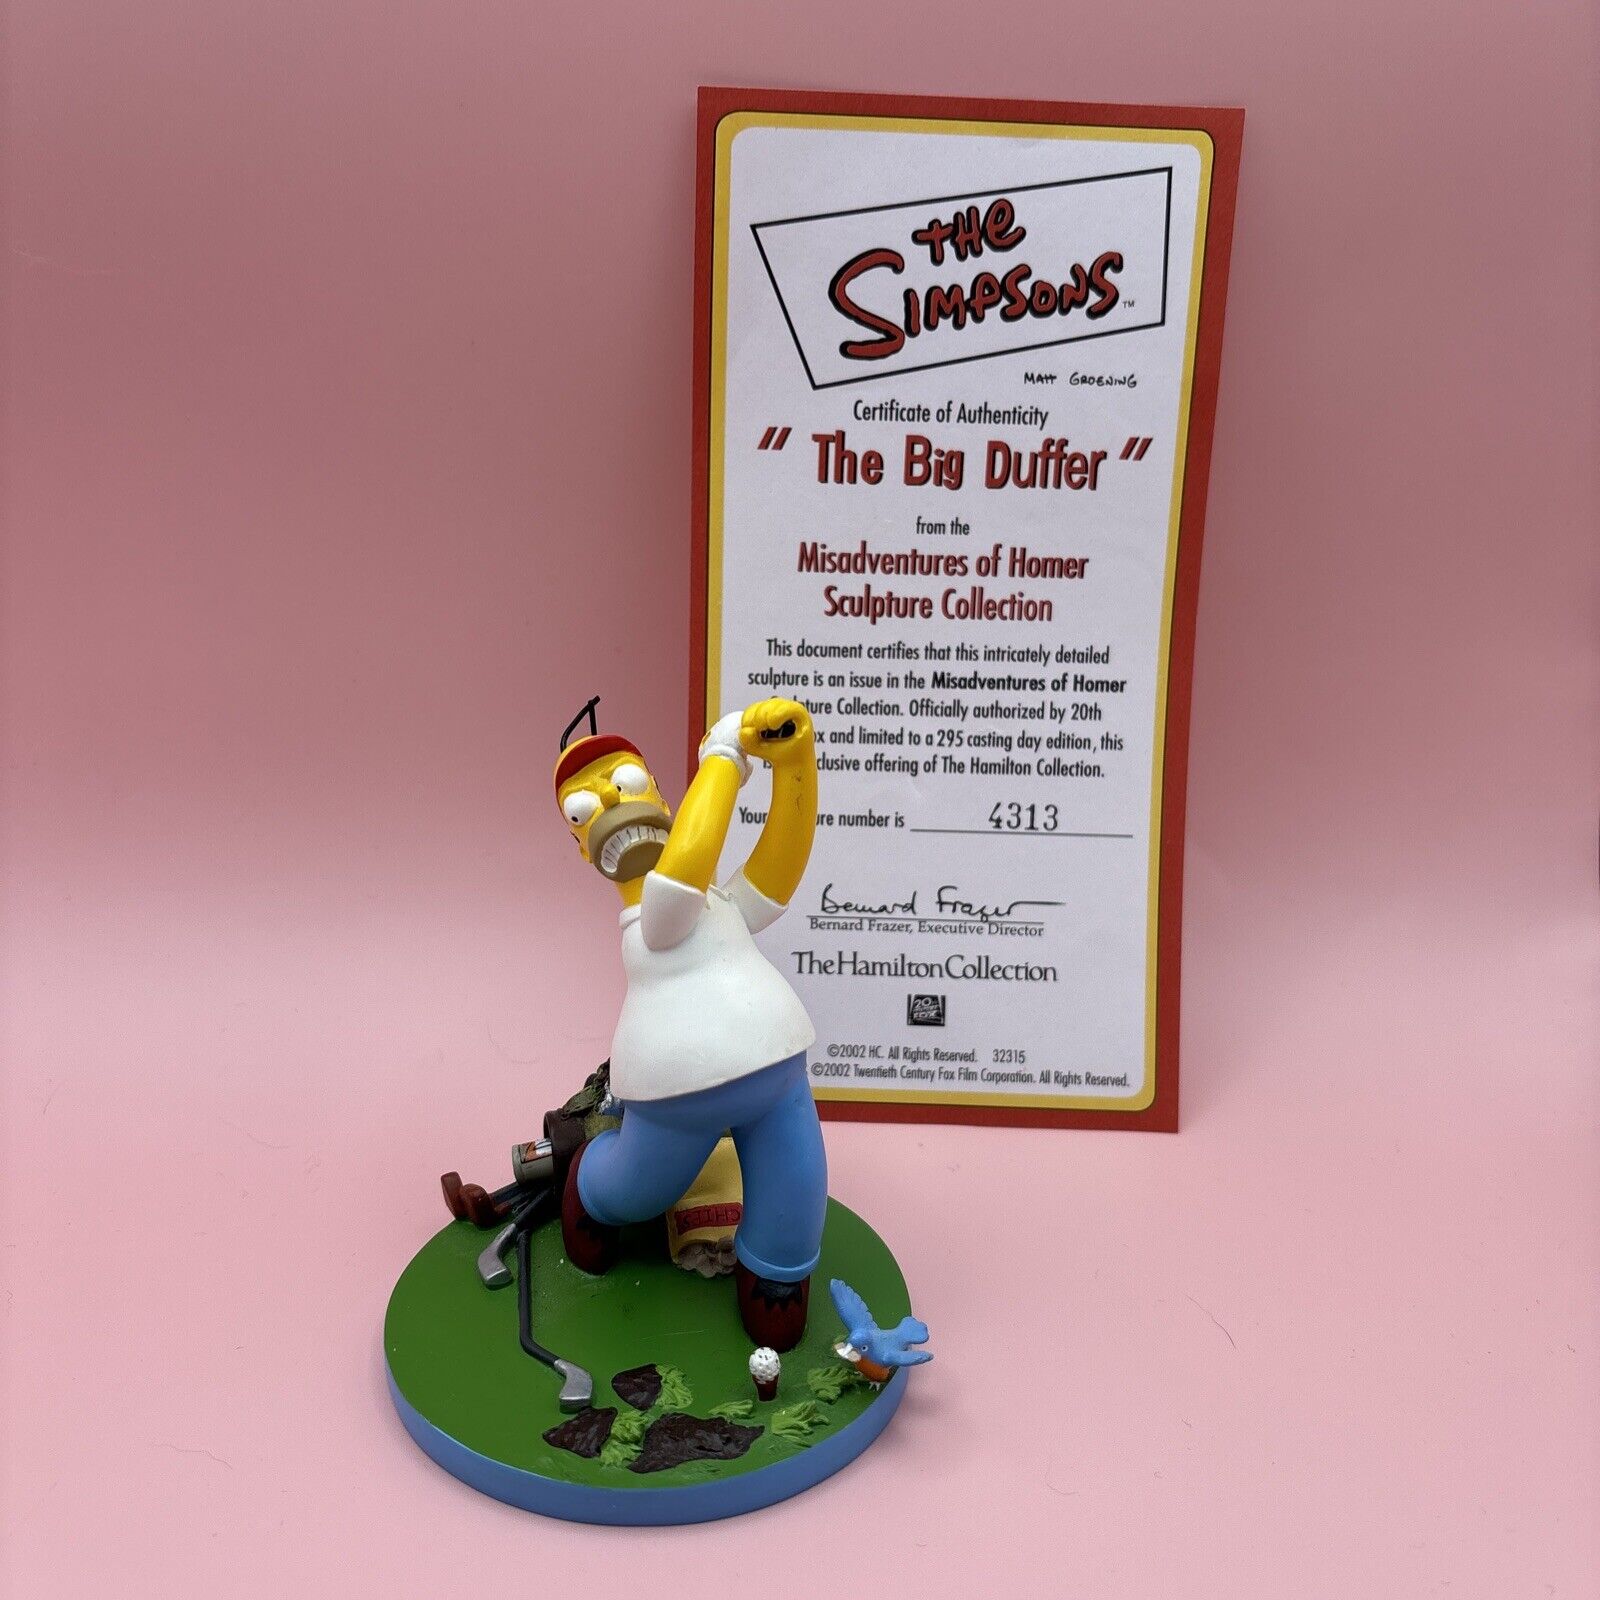 The Simpsons, Misadventures of Homer: “The Big Duffer” Hamilton Collection COA